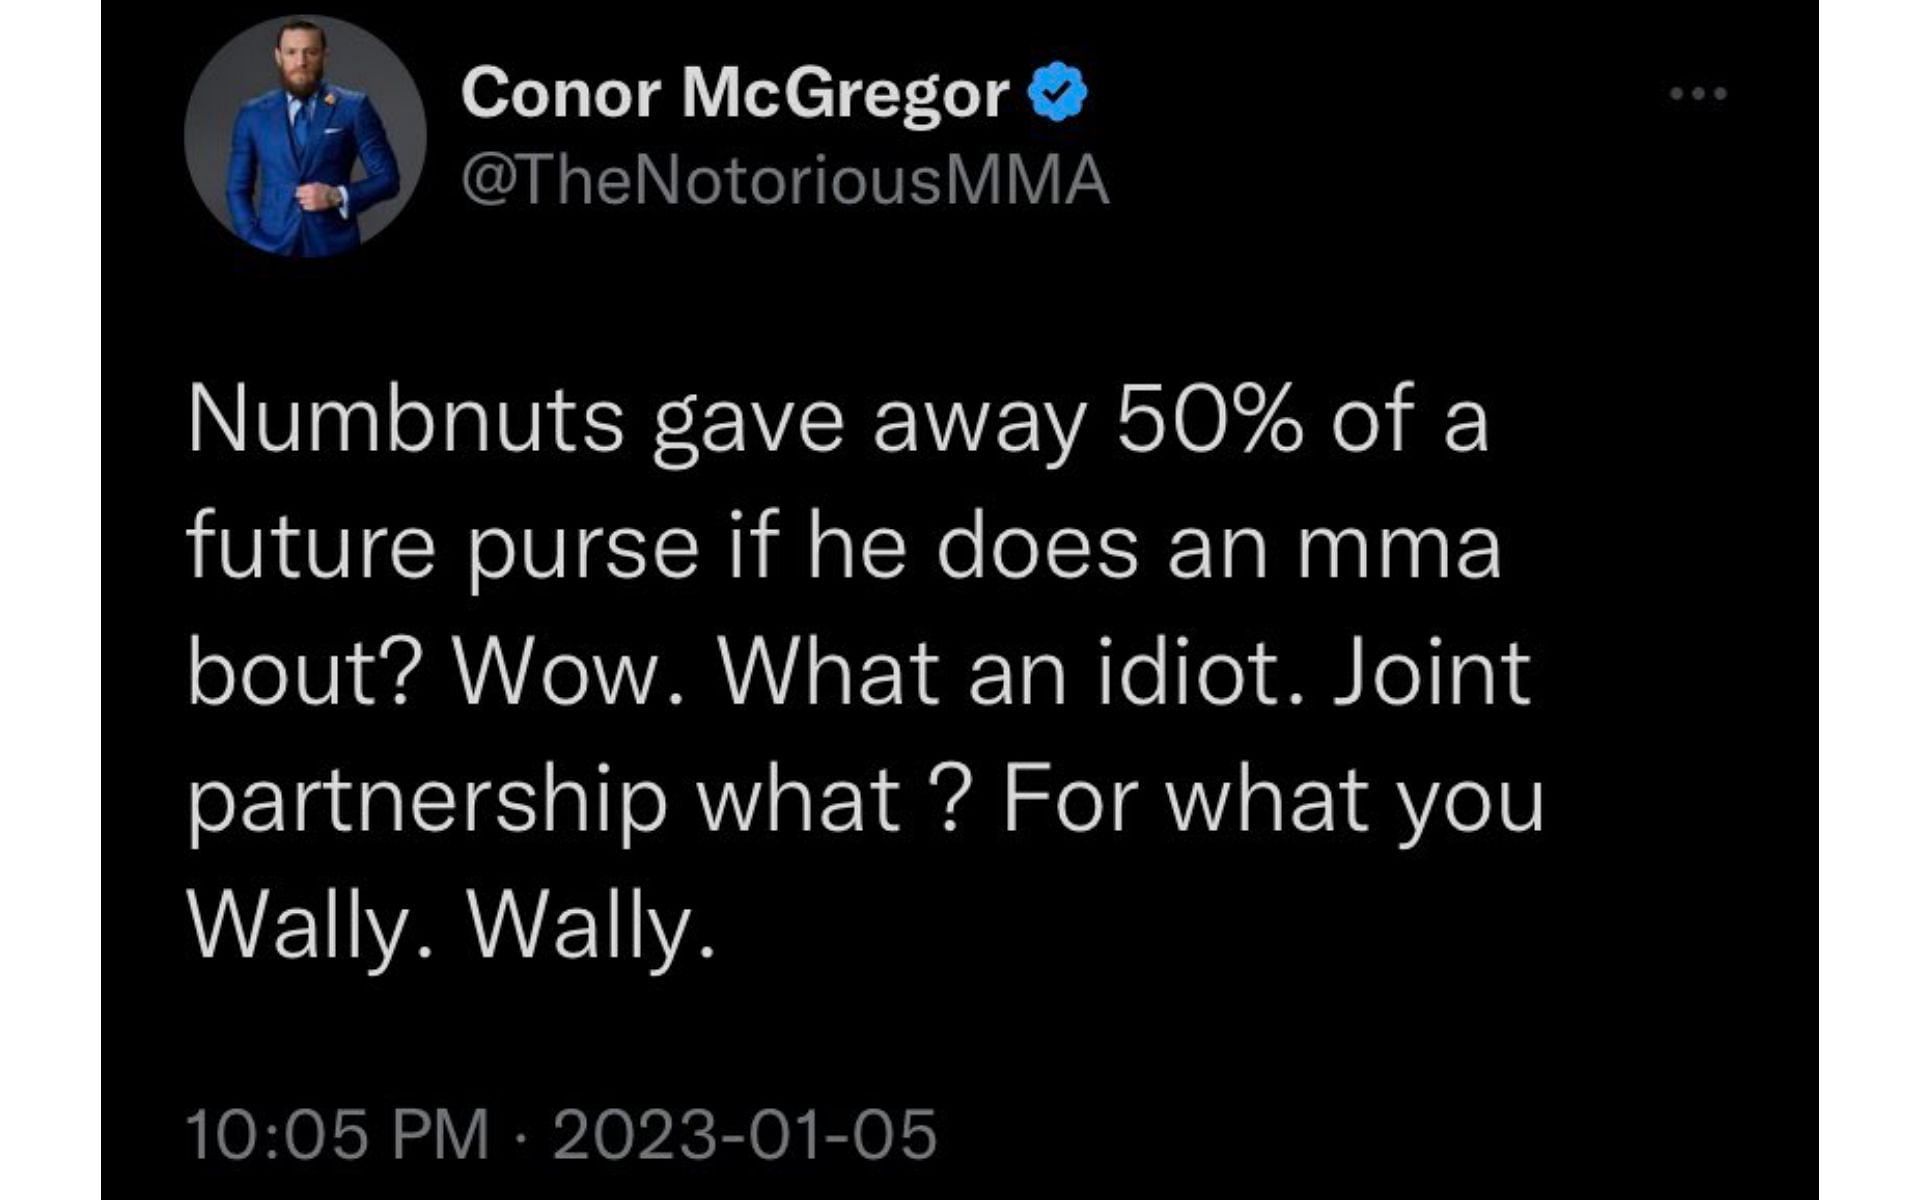 Screenshot of the now-deleted tweet via @TheNotoriousMMA on Twitter